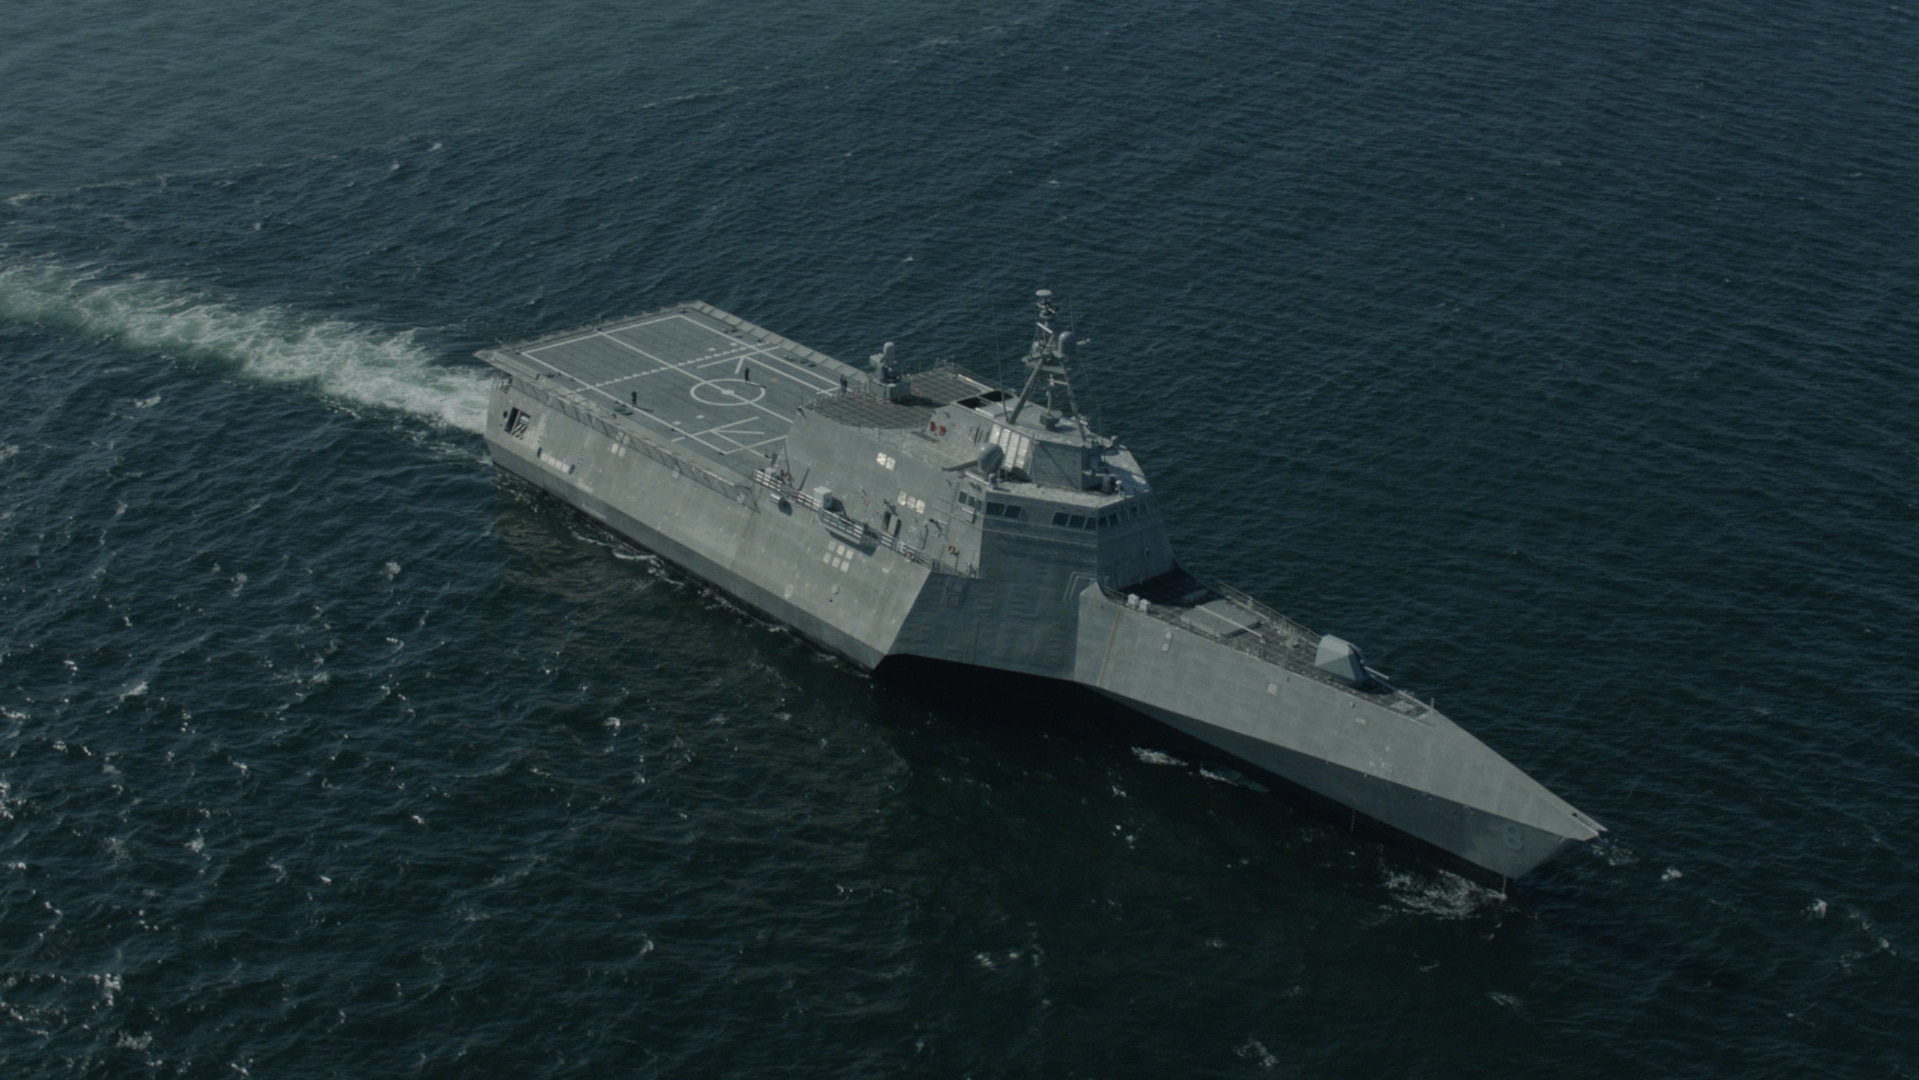 160506-N-ZZ999-001 (May 6, 2016)Future USS Montgomery (LCS 8) at sea conducting acceptance trials demonstrating the performance of the propulsion plant, ship handling, and auxiliary systems. The acceptance trial is the last significant milestone before delivery of the ship to the Navy, which is planned for later this spring. 